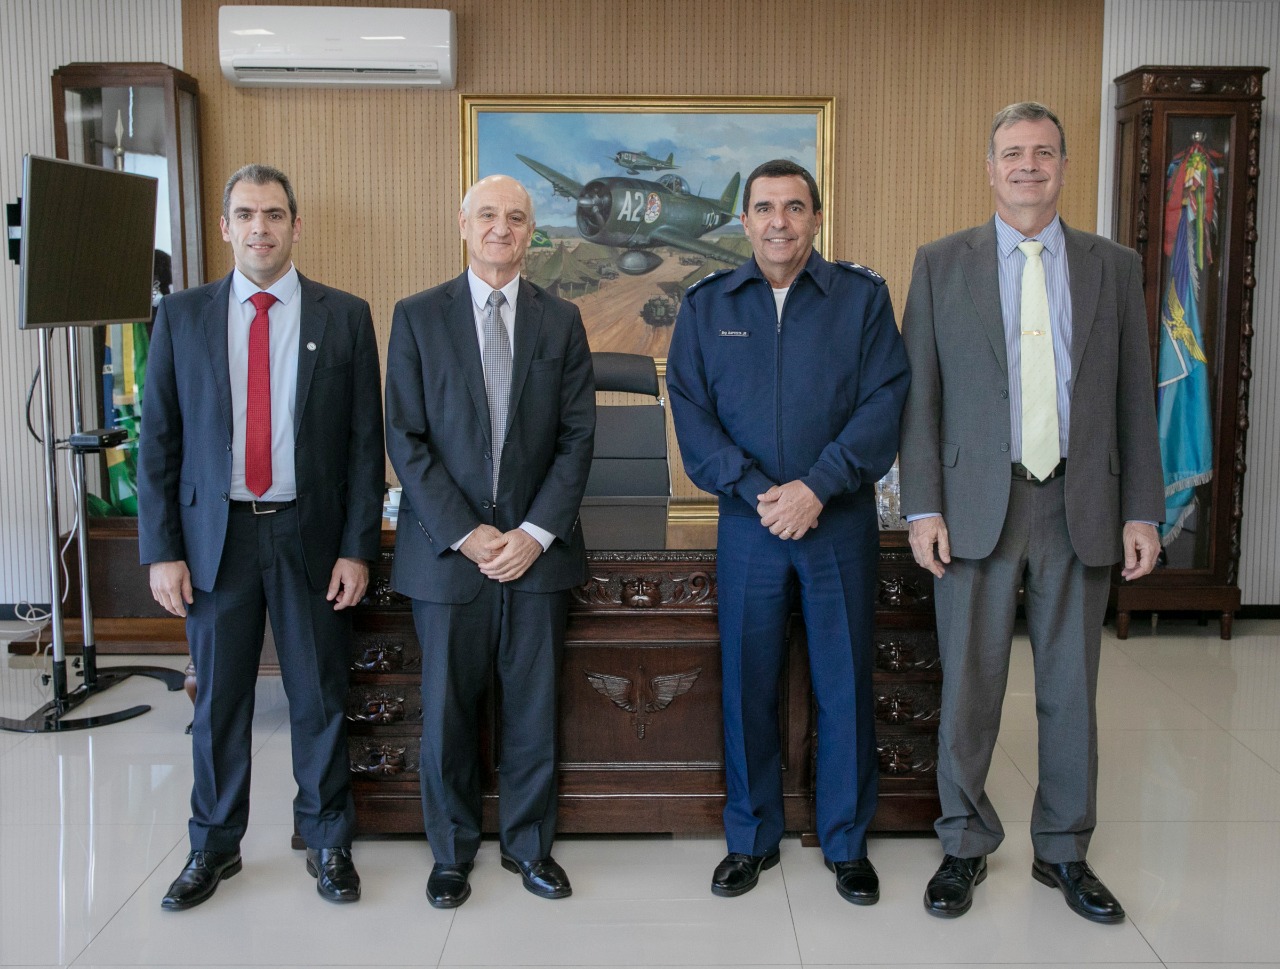 Commander of the Air Force receives Safran Brazil's CEO - Photo: Sgt. Figueira / CECOMSAER